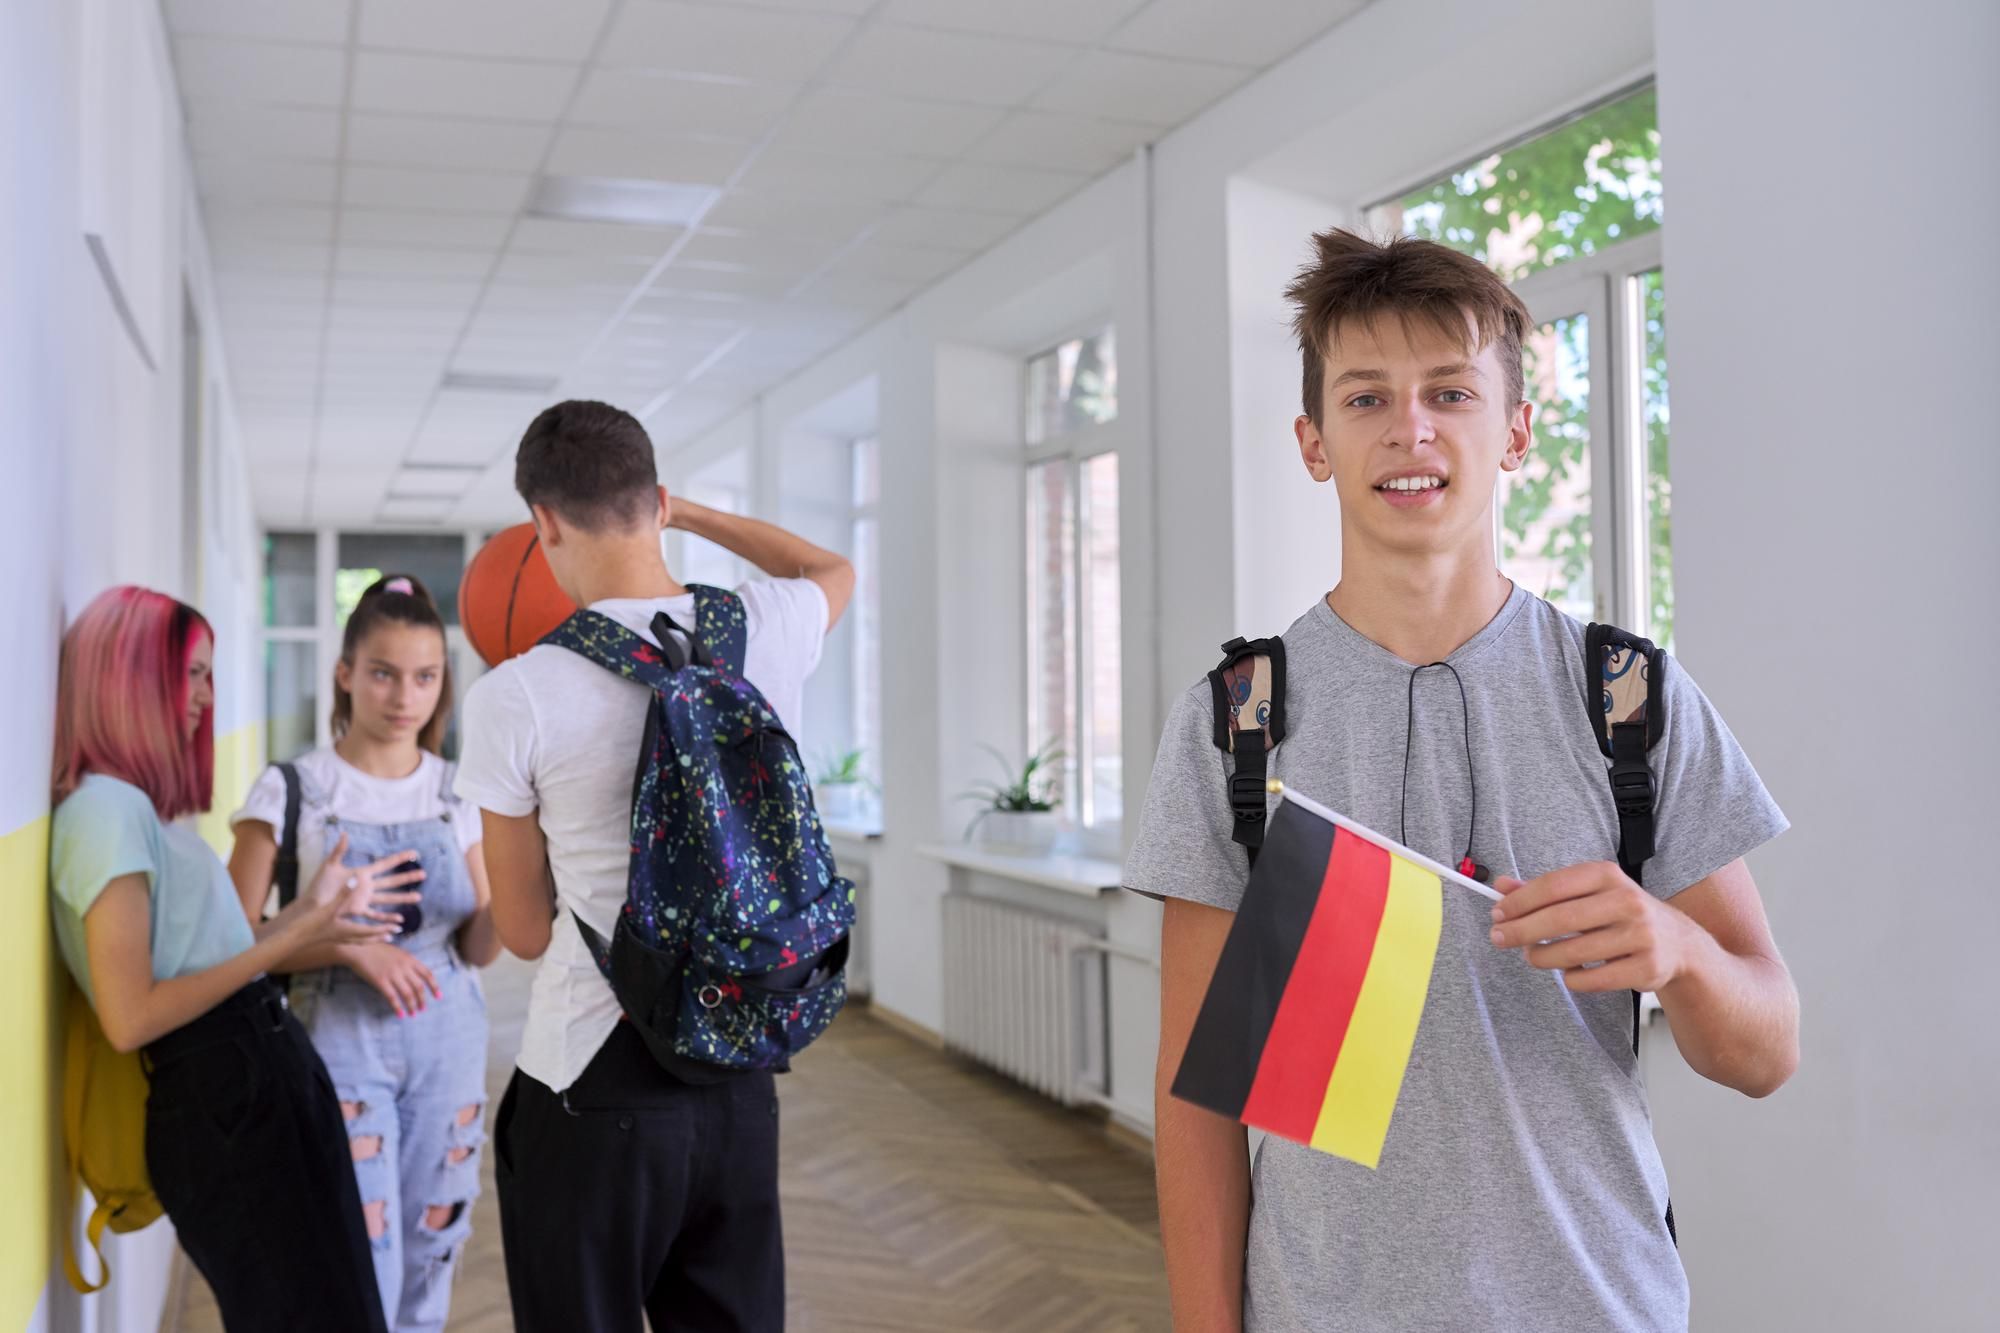 73-of-ukrainian-refugees-in-germany-have-university-degrees